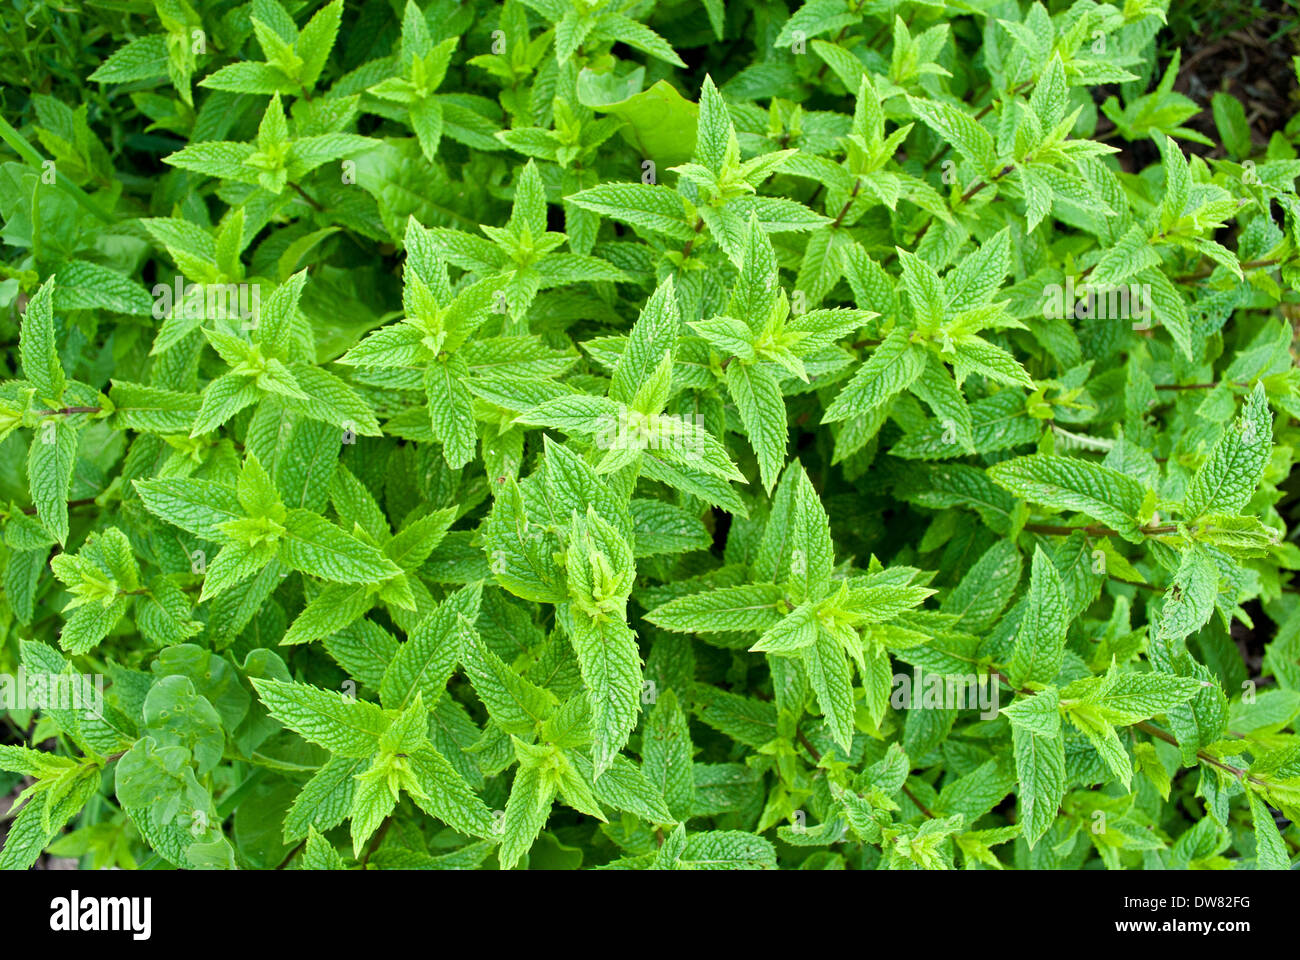 Mint leaves on mint plant Stock Photo